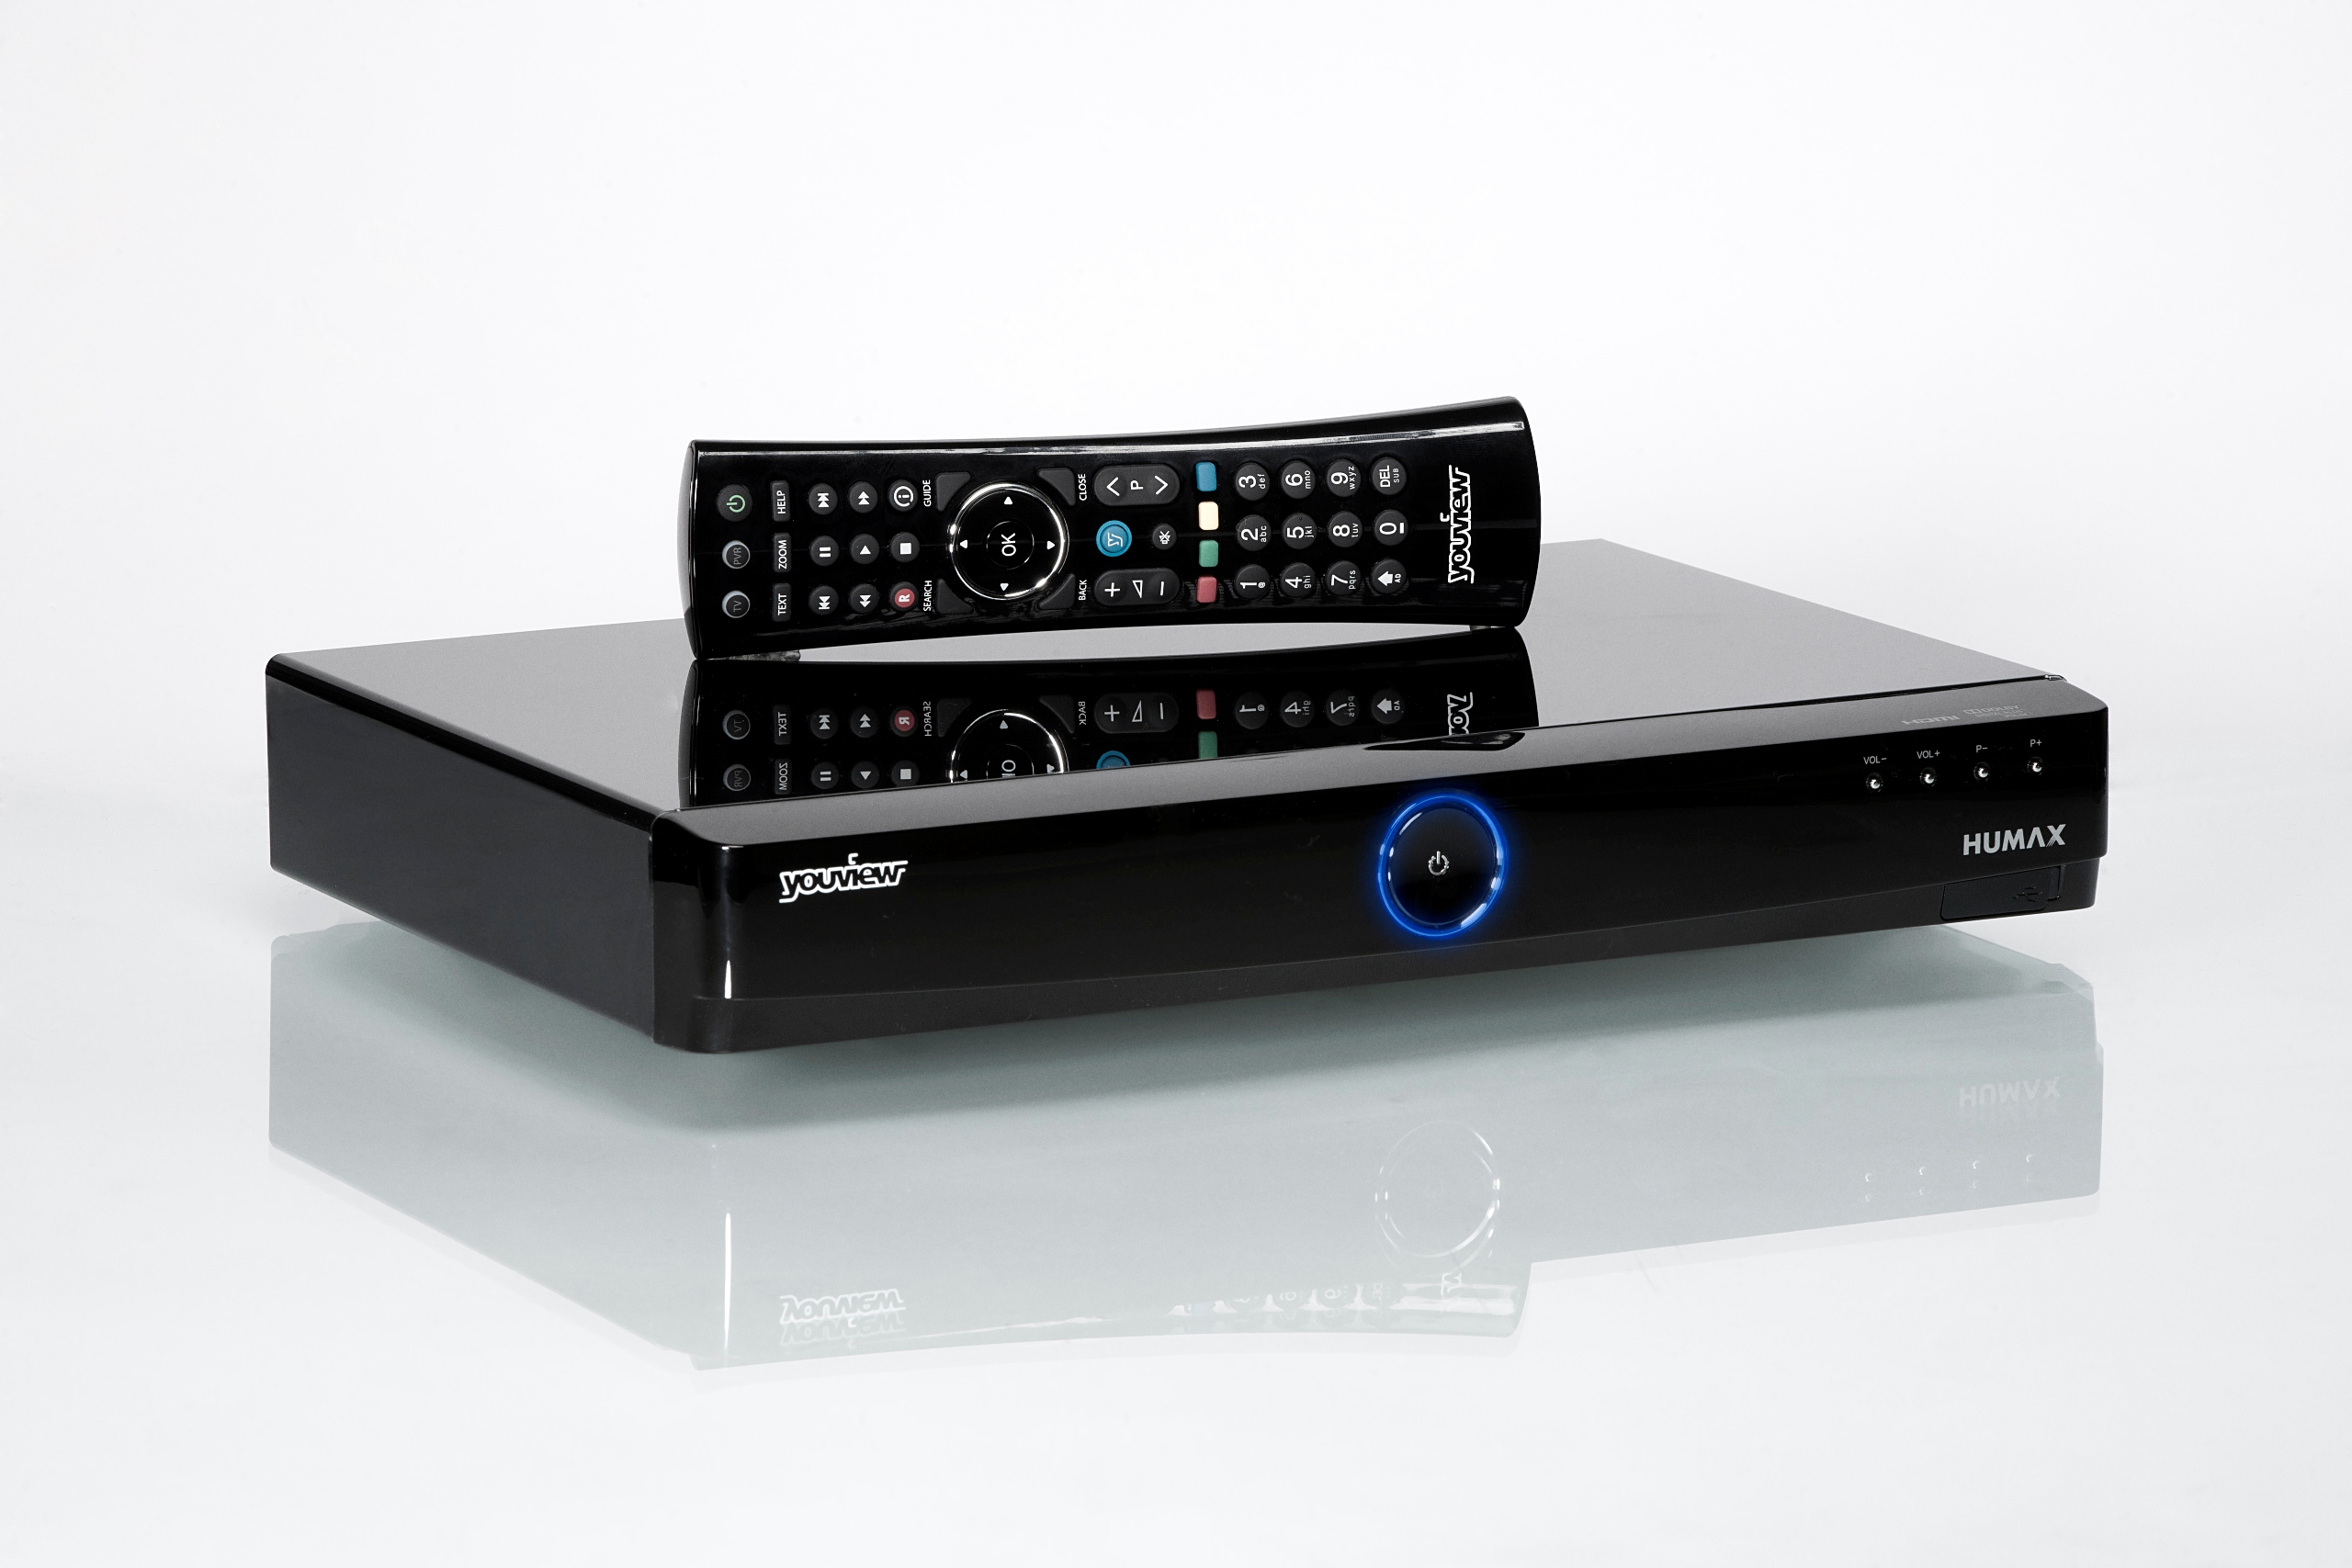 New YouView update brings Dolby surround sound, HDMI fixes and more